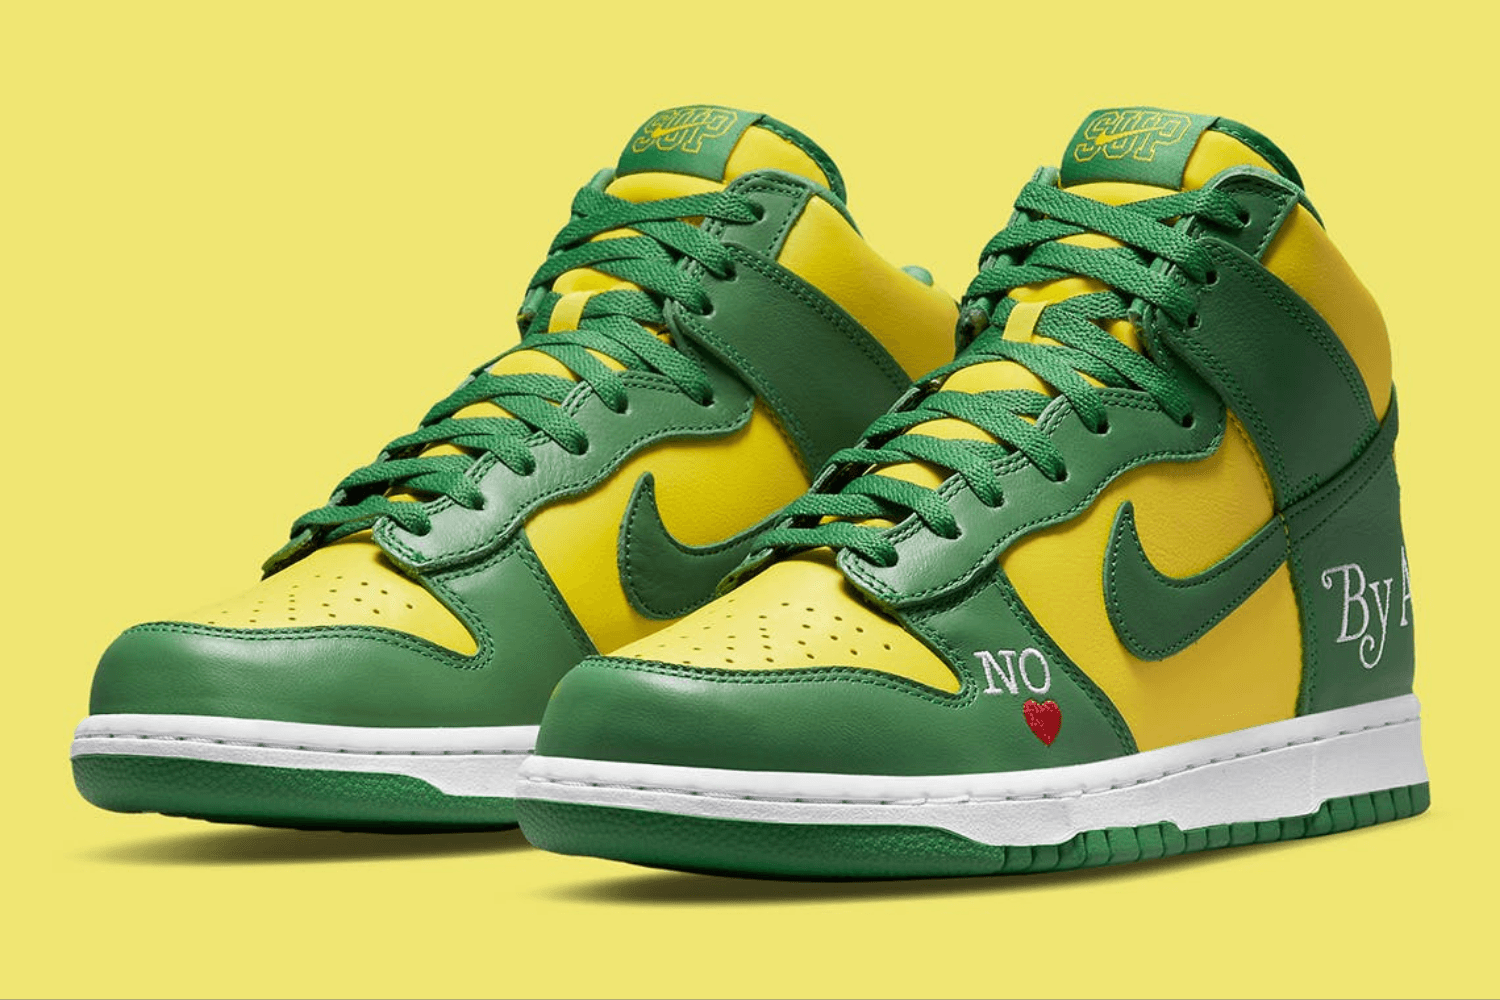 Der Supreme x Nike SB Dunk High 'By Any Means' bekommt einen 'Brazil' Colorway